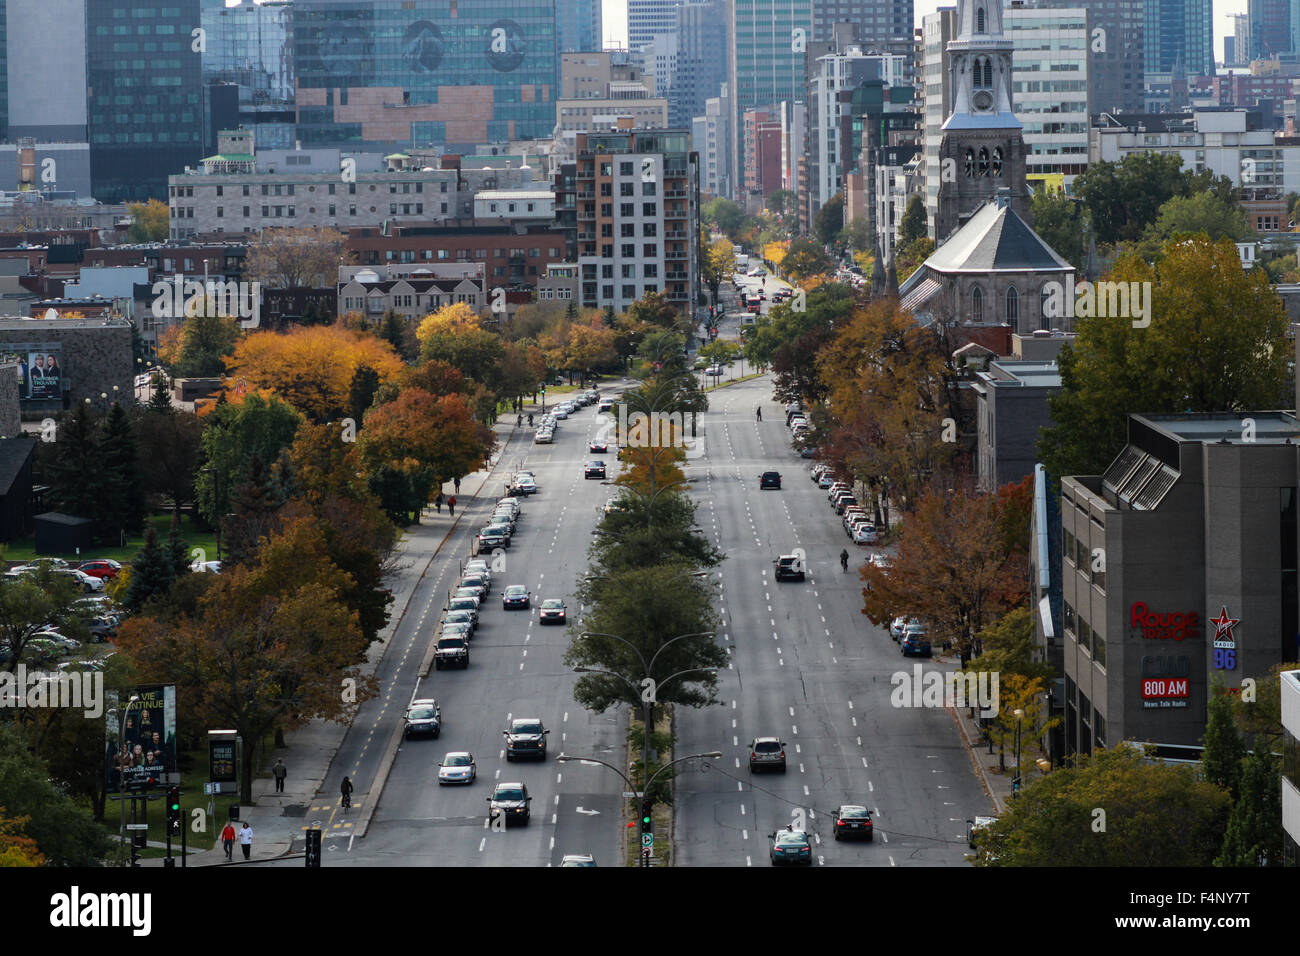 The city of Montreal, Quebec. Stock Photo